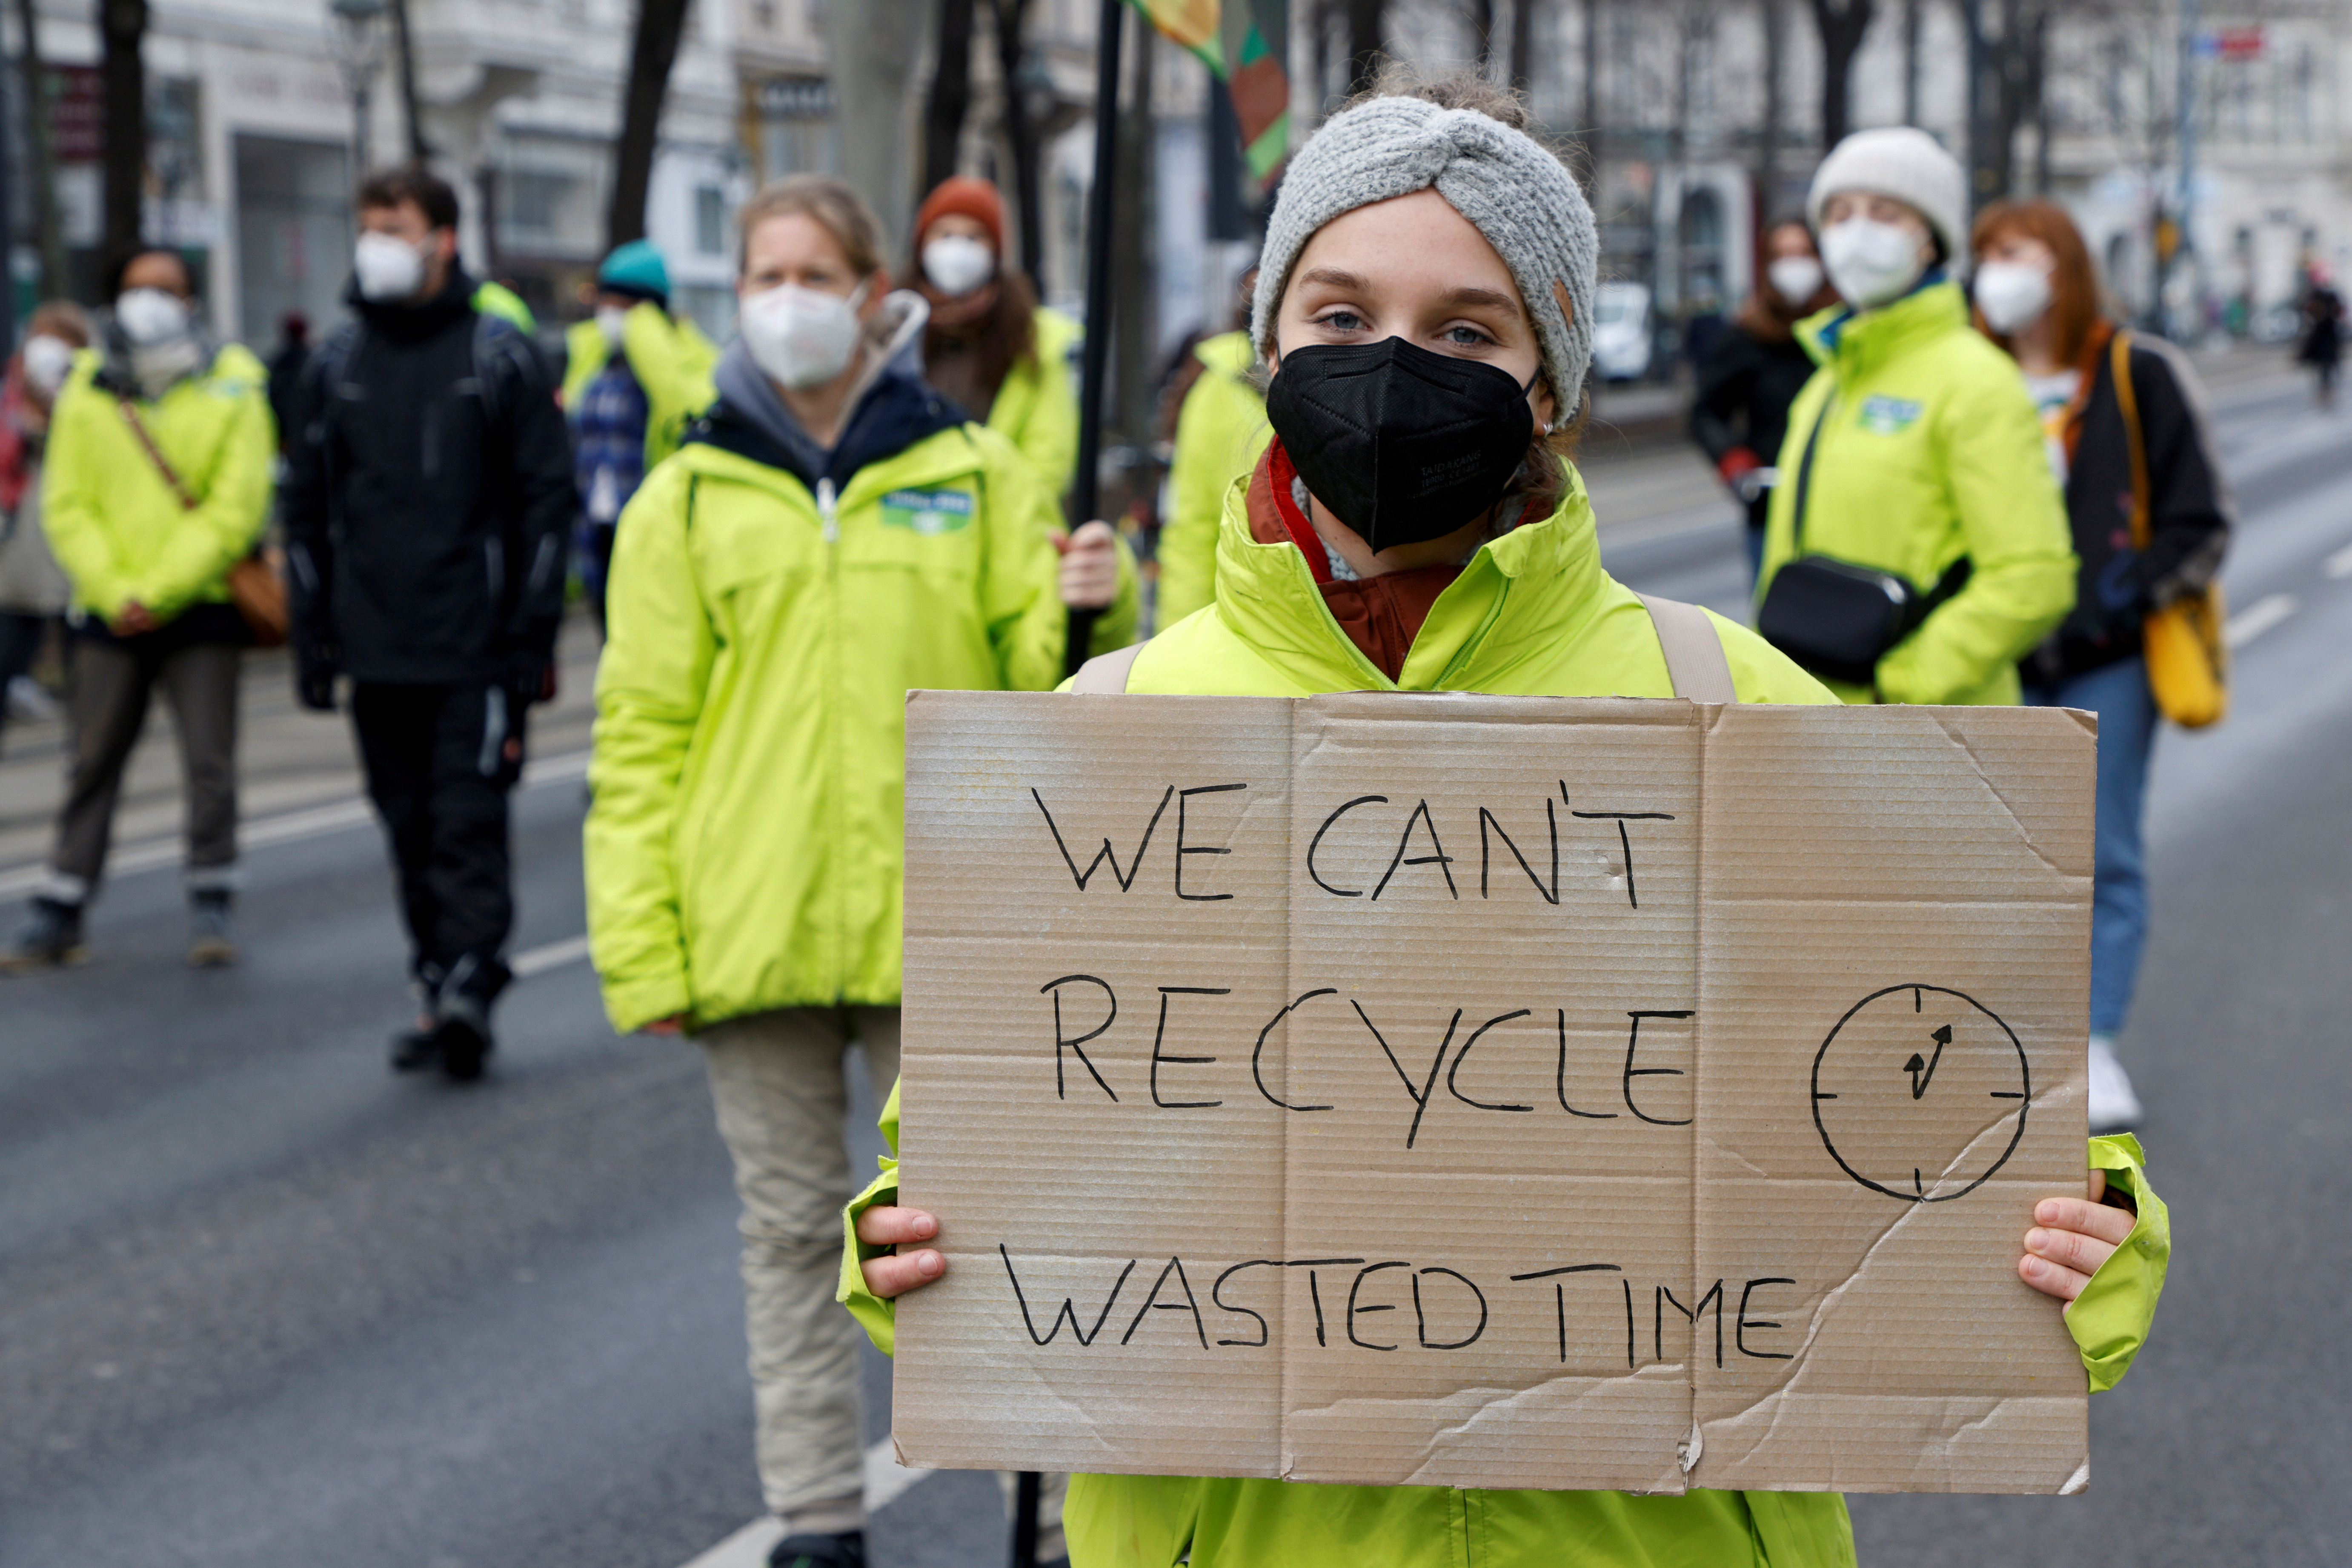 Fridays for Future activists protest in Vienna as part of 